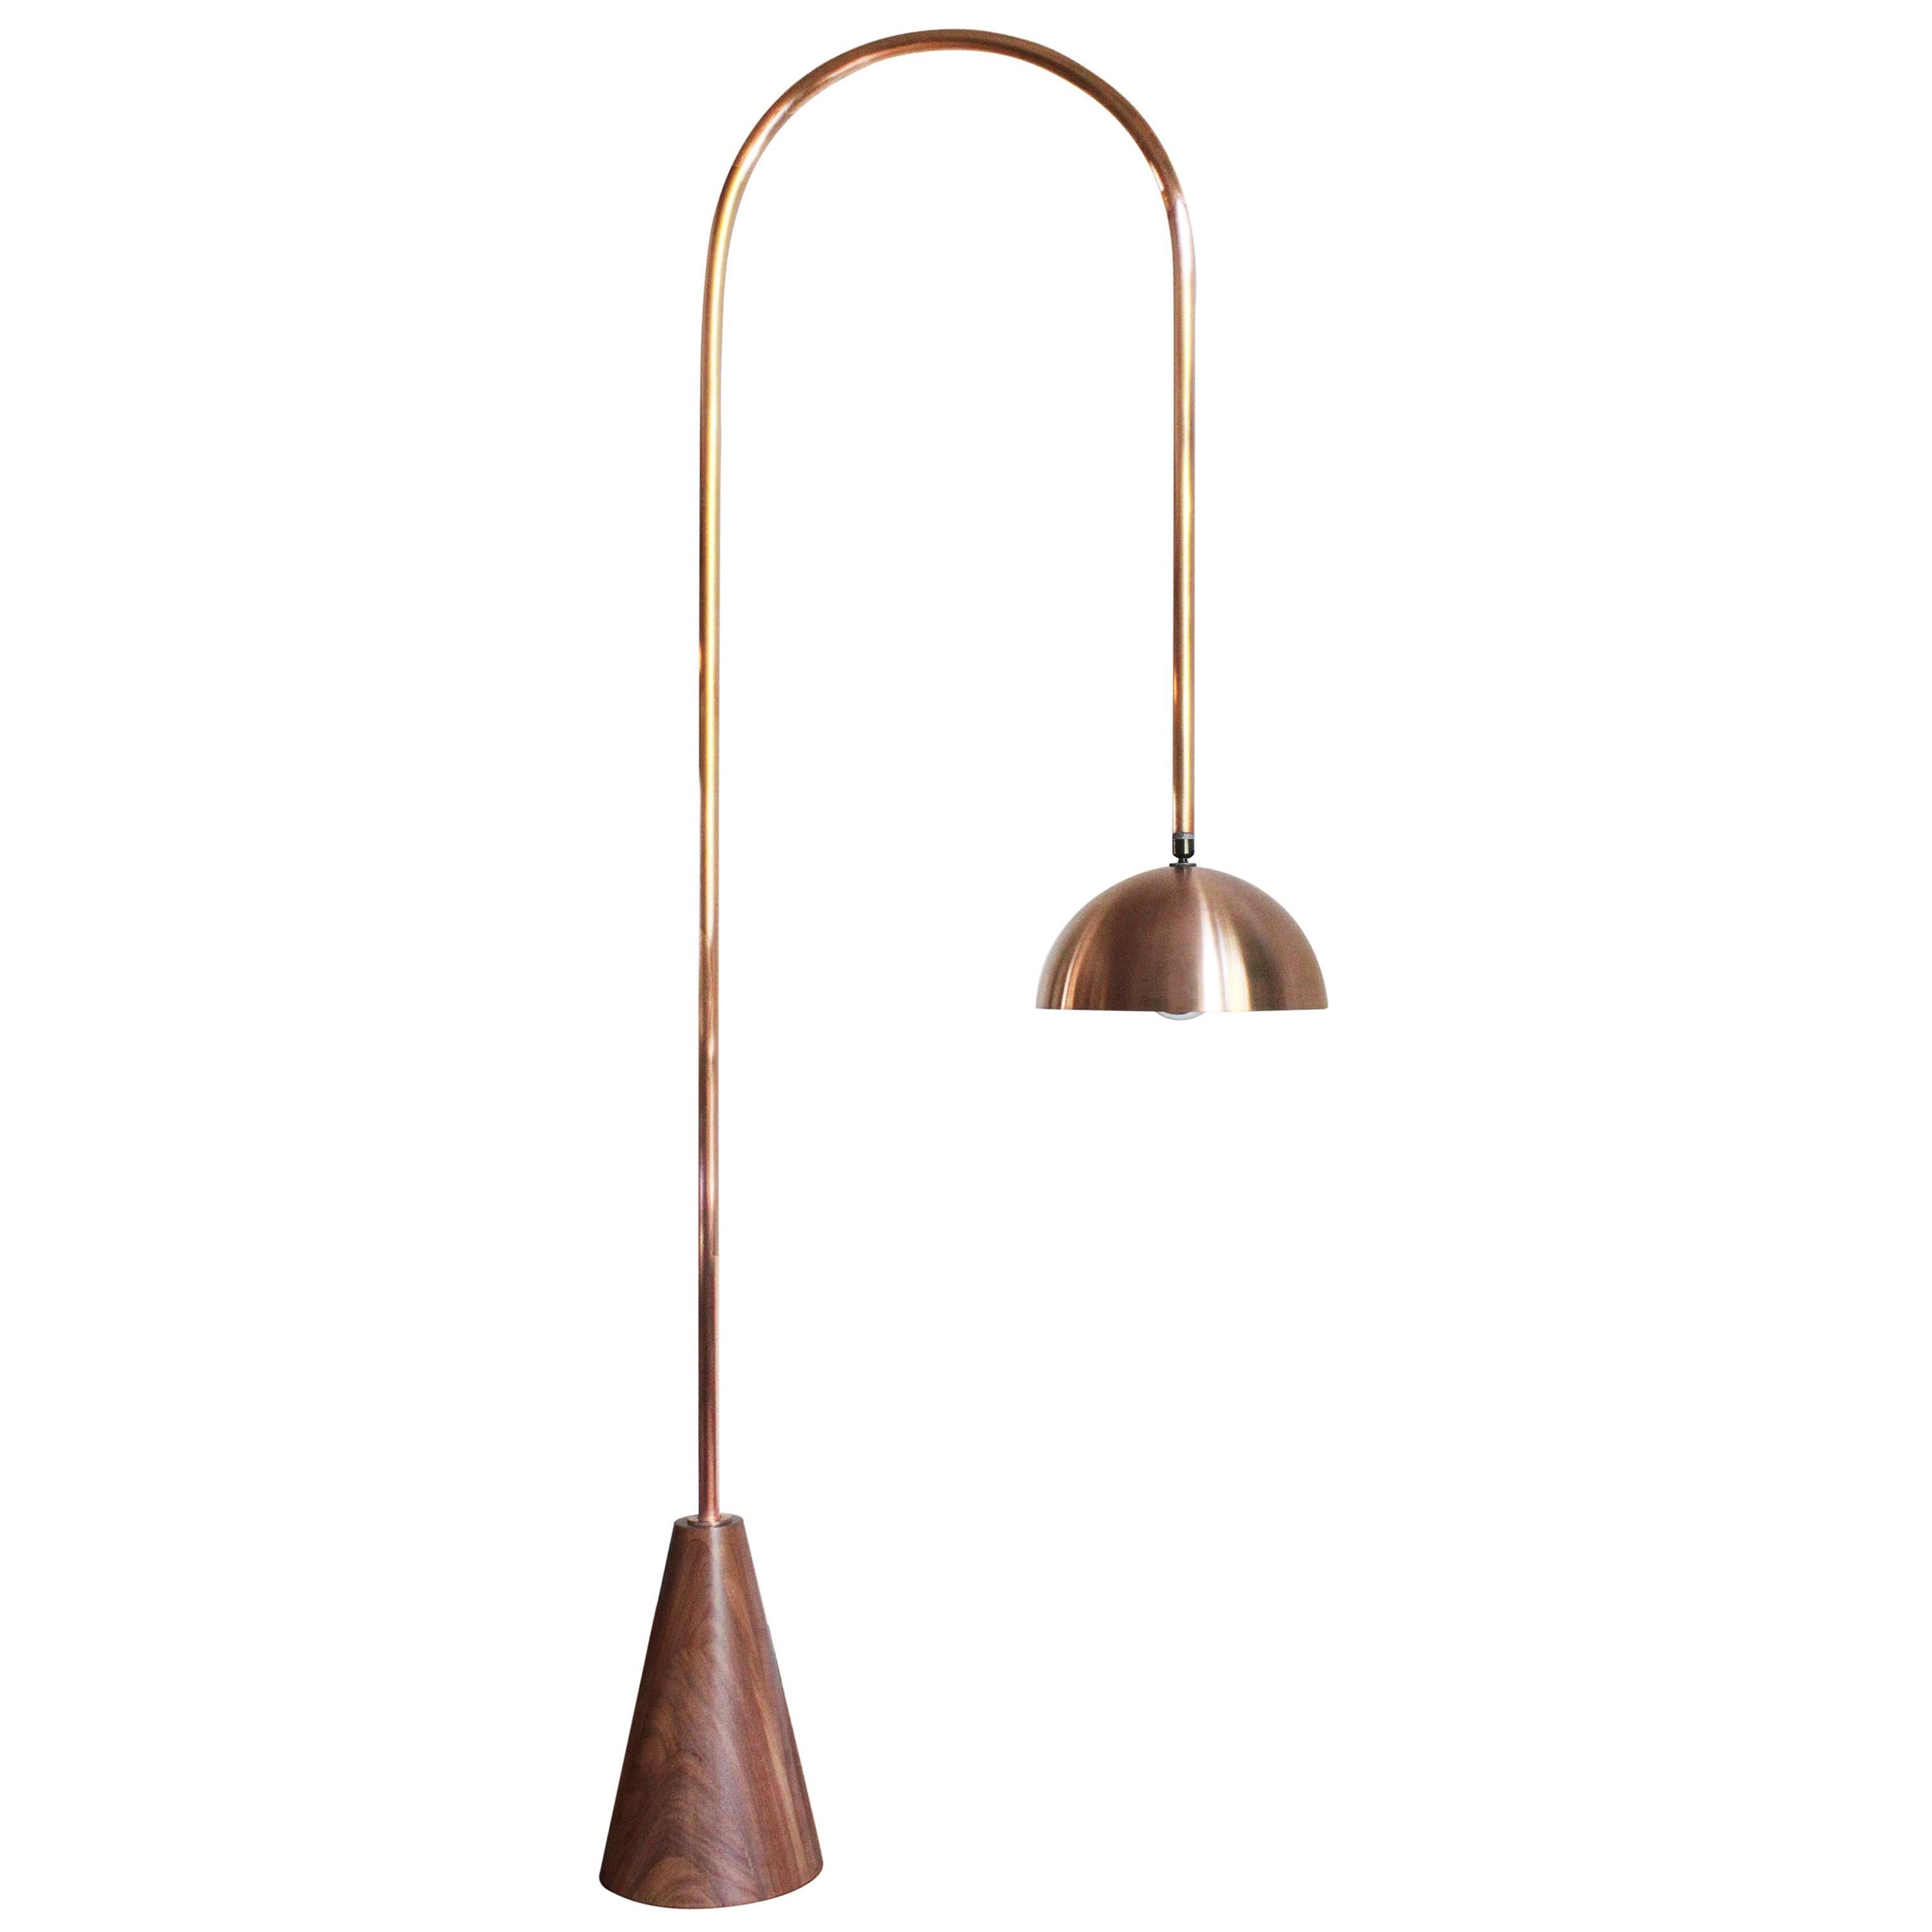 Arco De Pie Floor Lamp by Maria Beckmann, Represented by Tuleste Factory For Sale